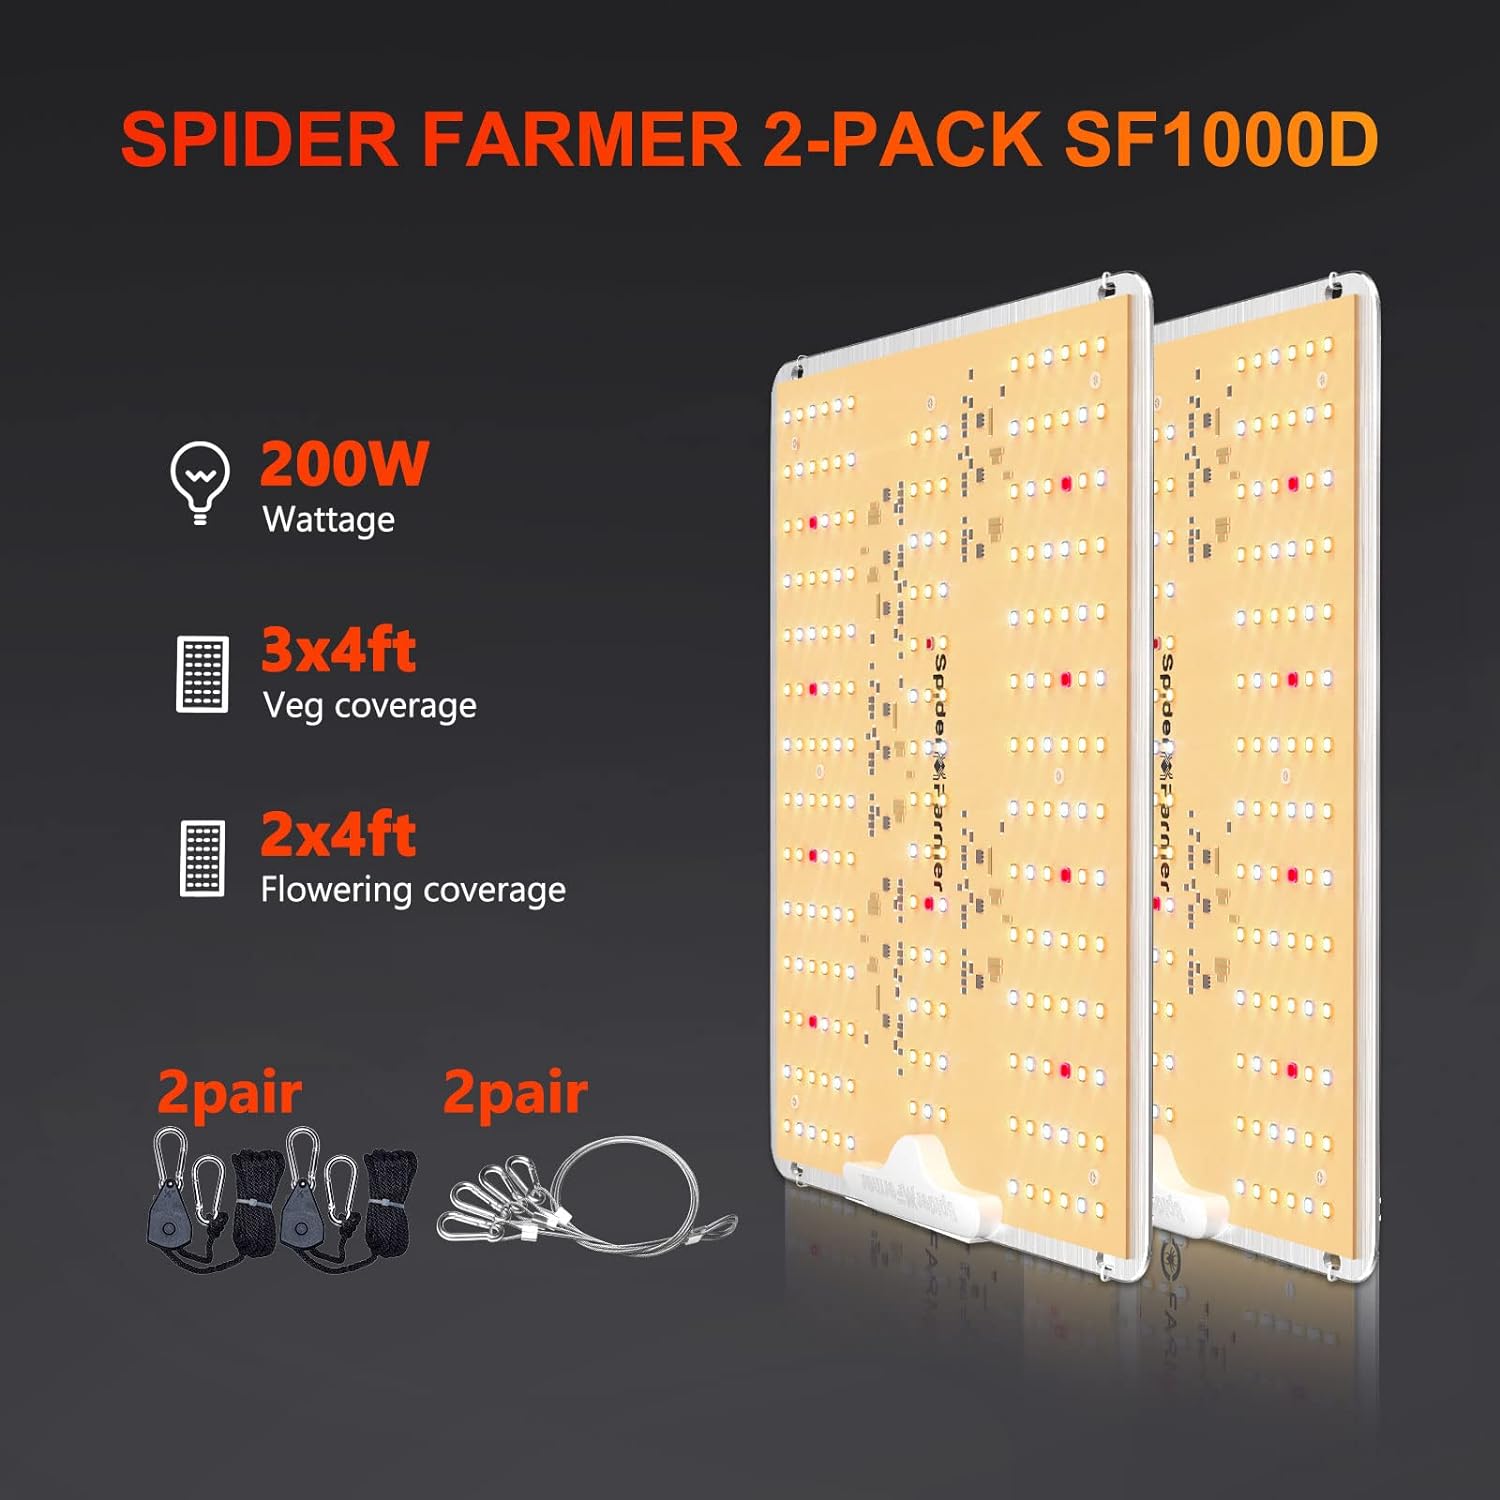 Spider Farmer 2024 New SF1000D LED Grow Light with Samsung LM301B Diodes Deeper Penetration  IR Lights Full Spectrum Growing Lamps for Indoor Plants Seedlings Vegetables Flowers 3x3/2x2 Grow Tent